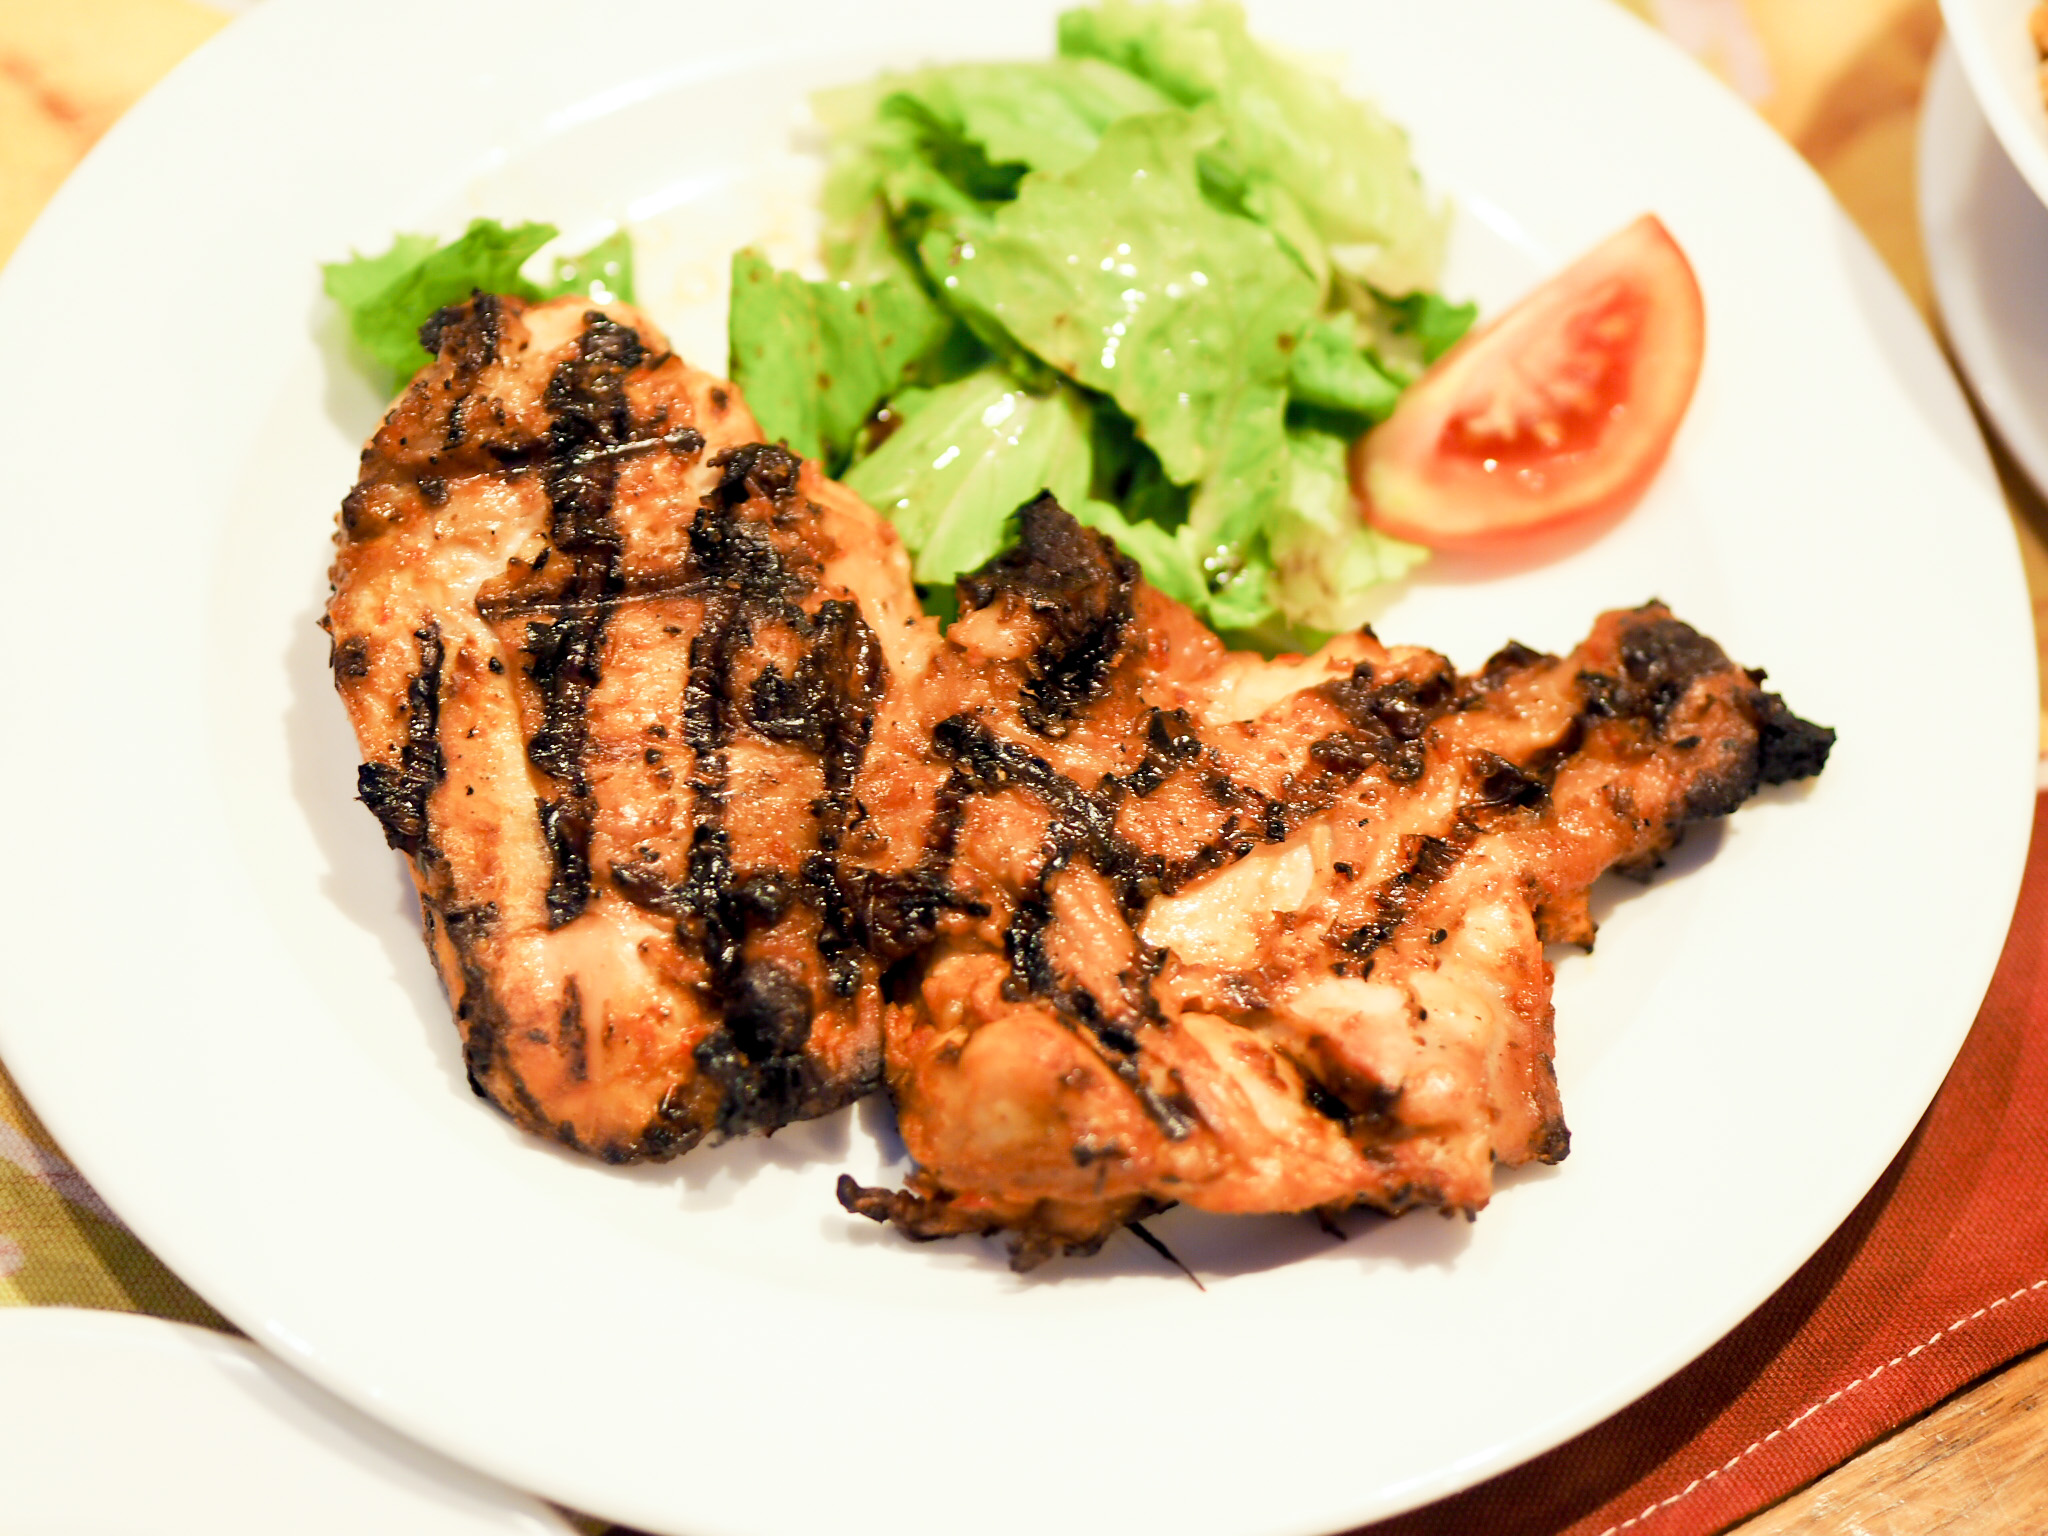 Spicy grilled chicken at nkoyo in Ceddi Plaza Abuja 